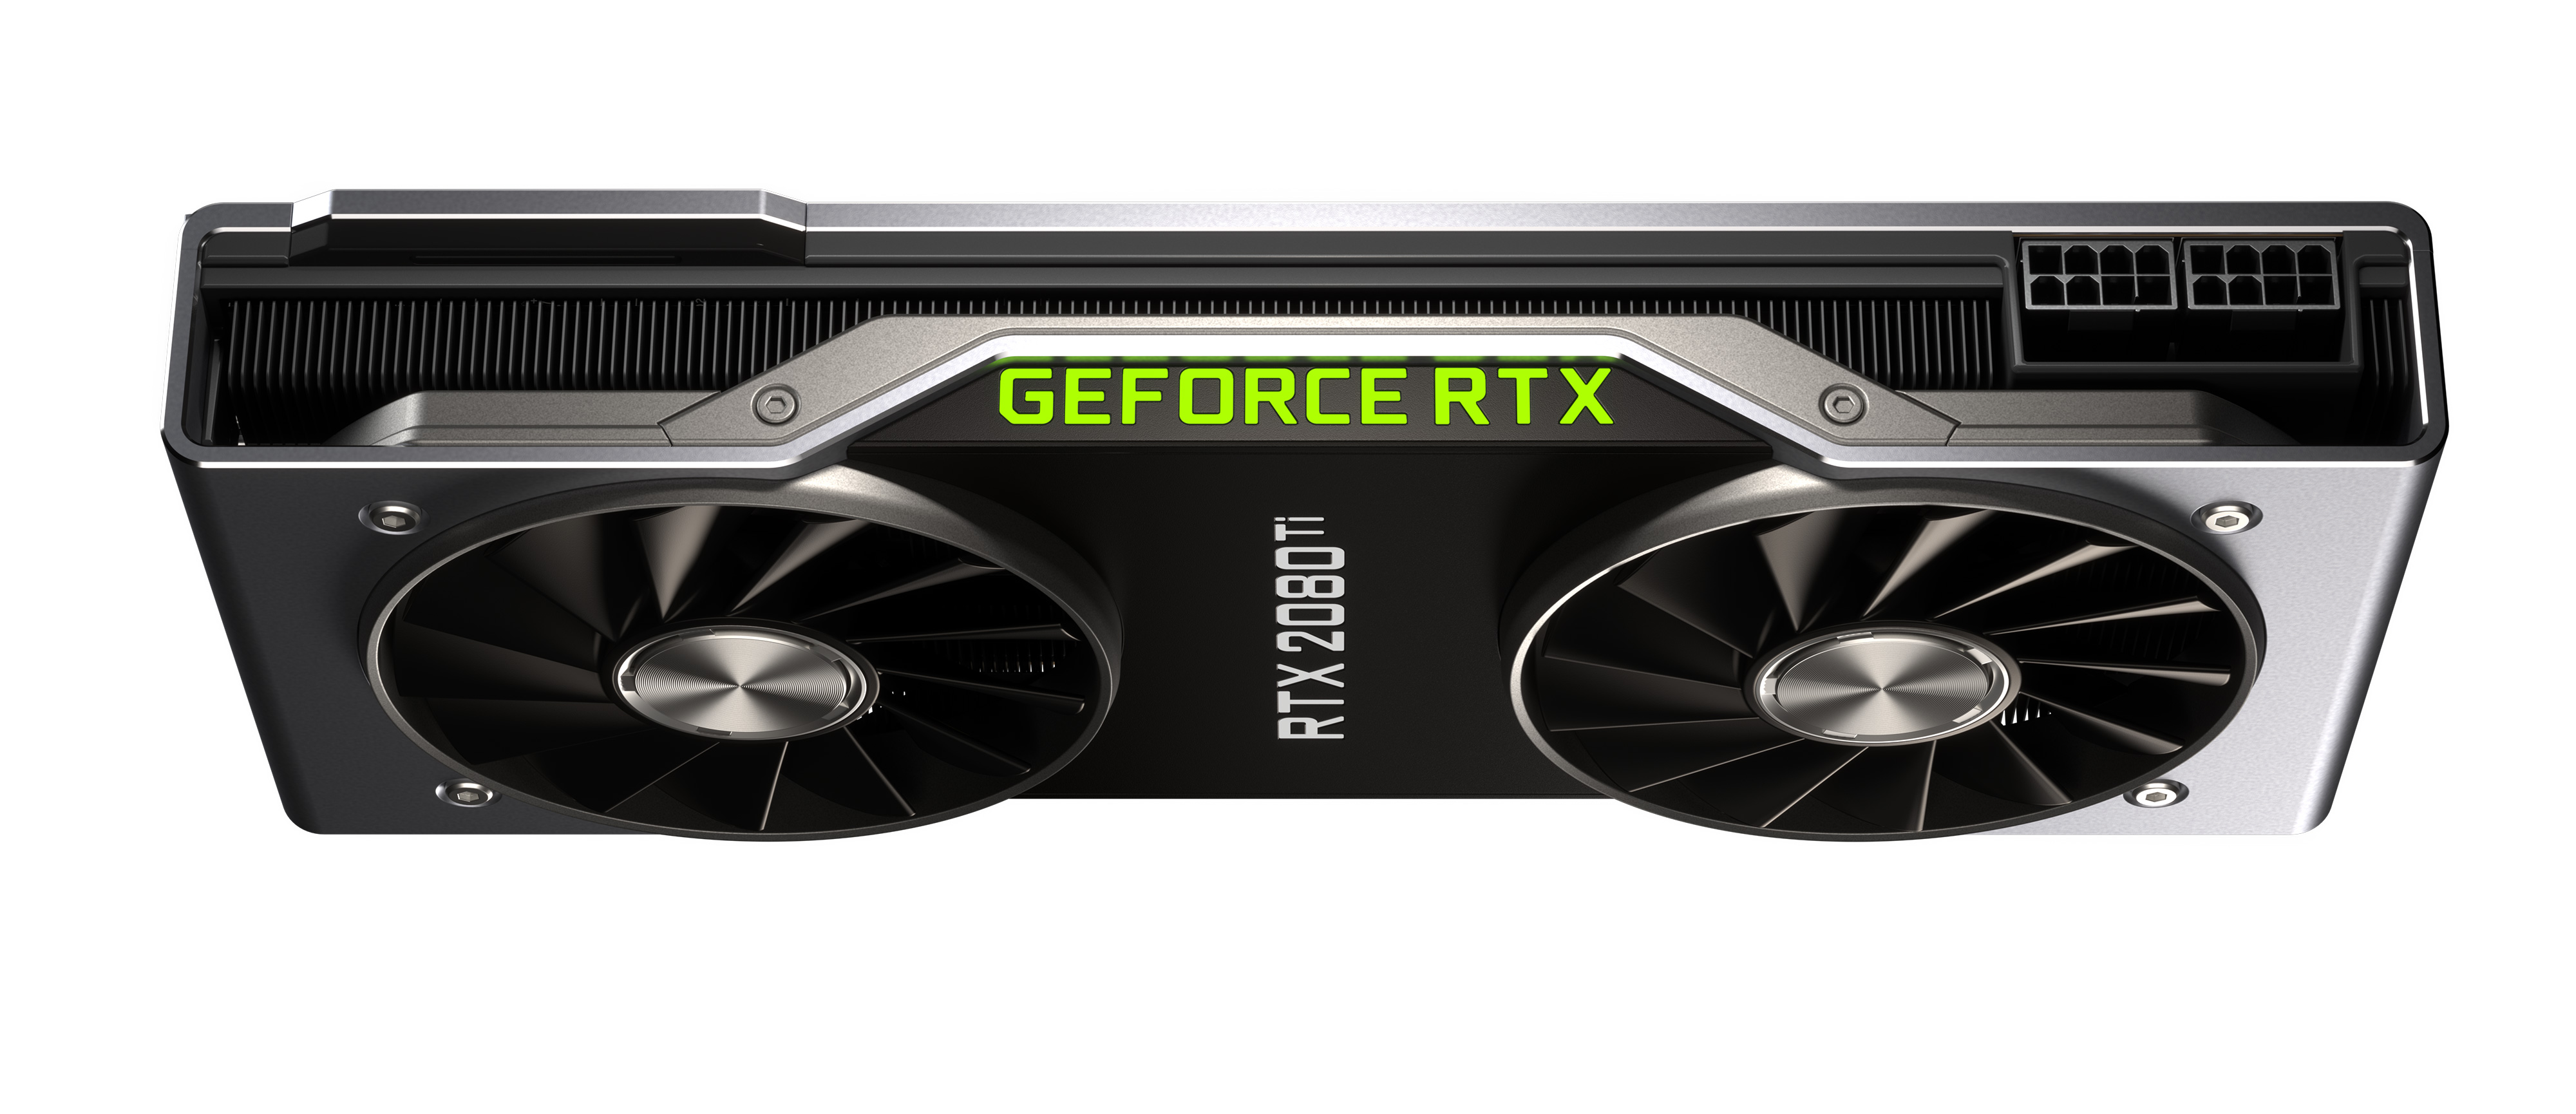 bidragyder syg ubehag Previewing GeForce RTX 2080 Ti - NVIDIA Announces the GeForce RTX 20  Series: RTX 2080 Ti & 2080 on Sept. 20th, RTX 2070 in October